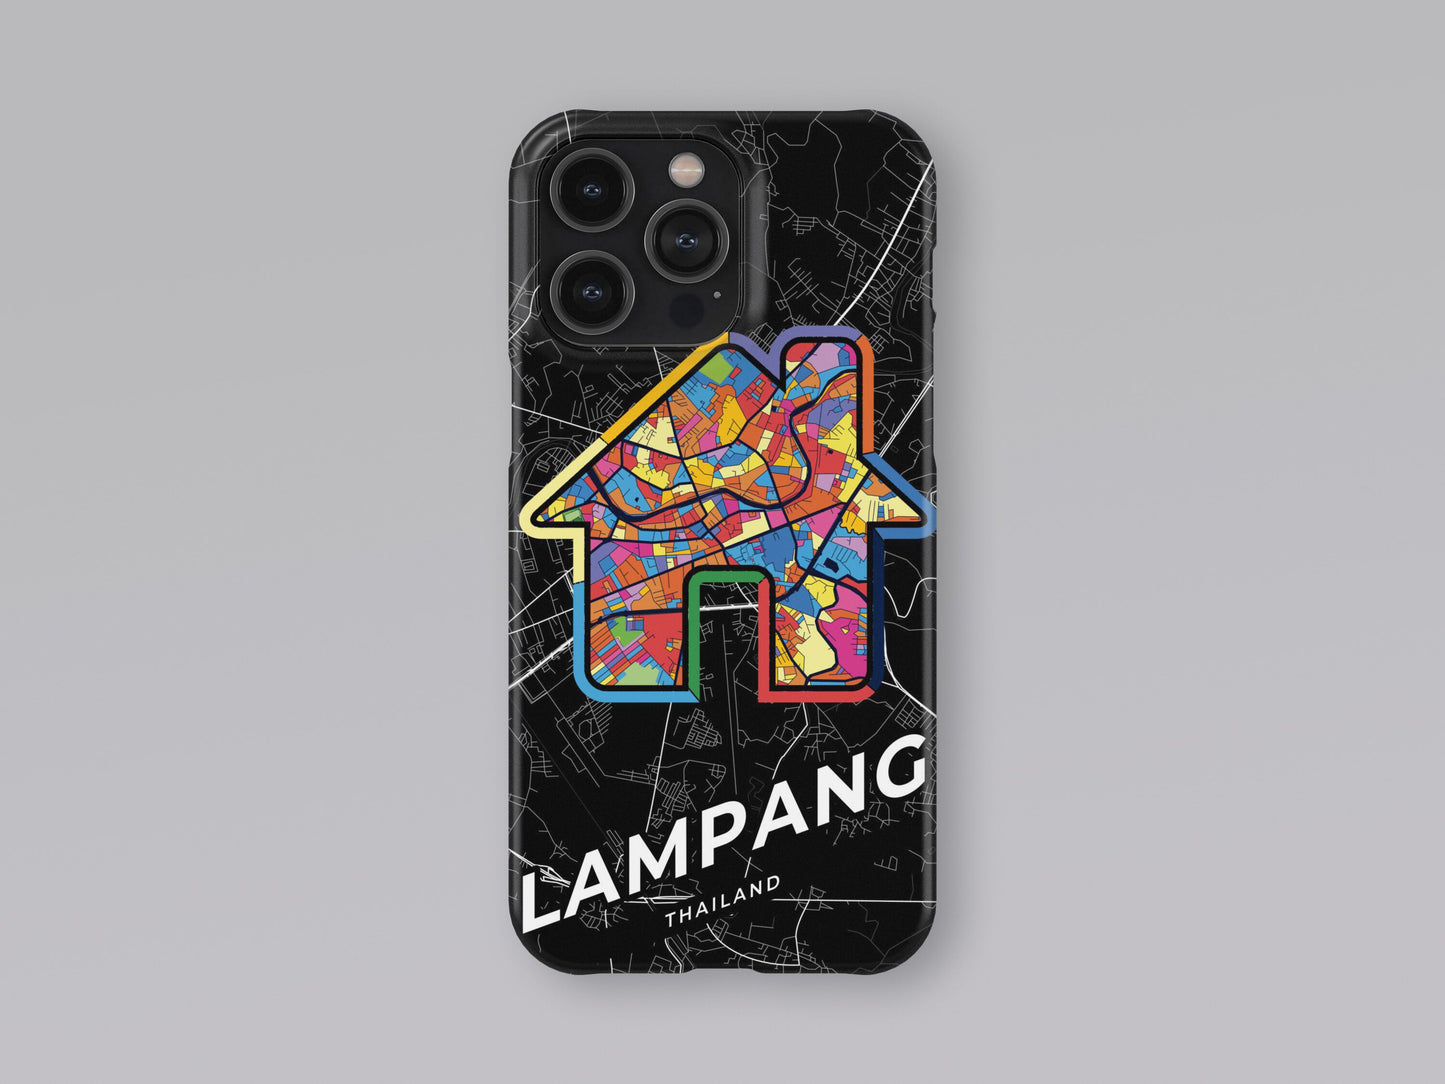 Lampang Thailand slim phone case with colorful icon. Birthday, wedding or housewarming gift. Couple match cases. 3